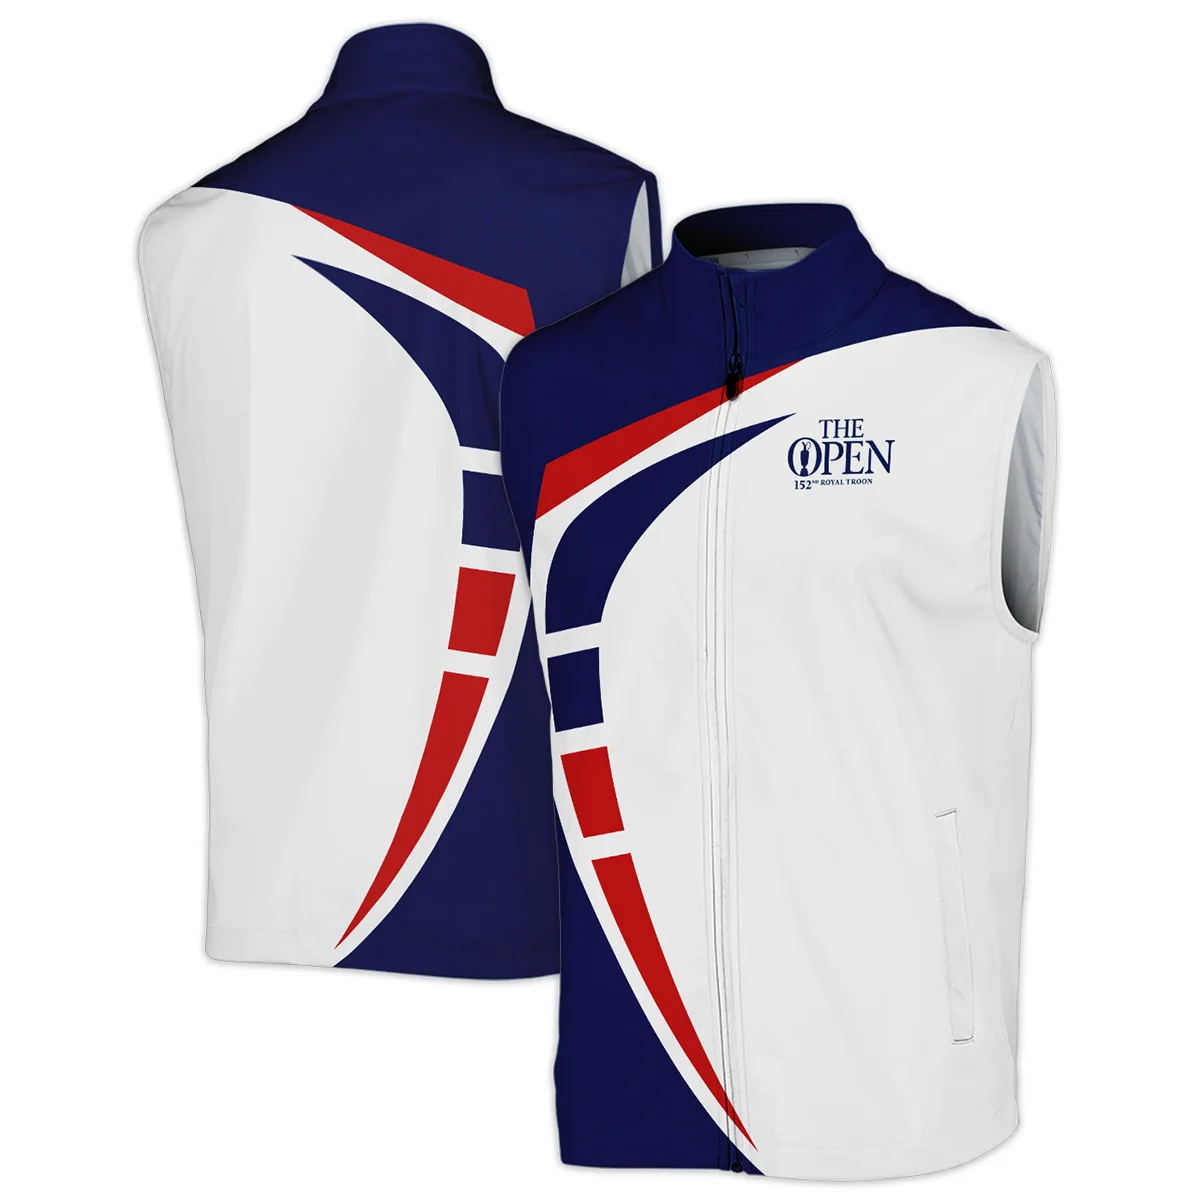 152nd Open Championship Callaway White Blue Red Pattern Background Sleeveless Jacket All Over Prints HOTOP270624A03CLWSJK